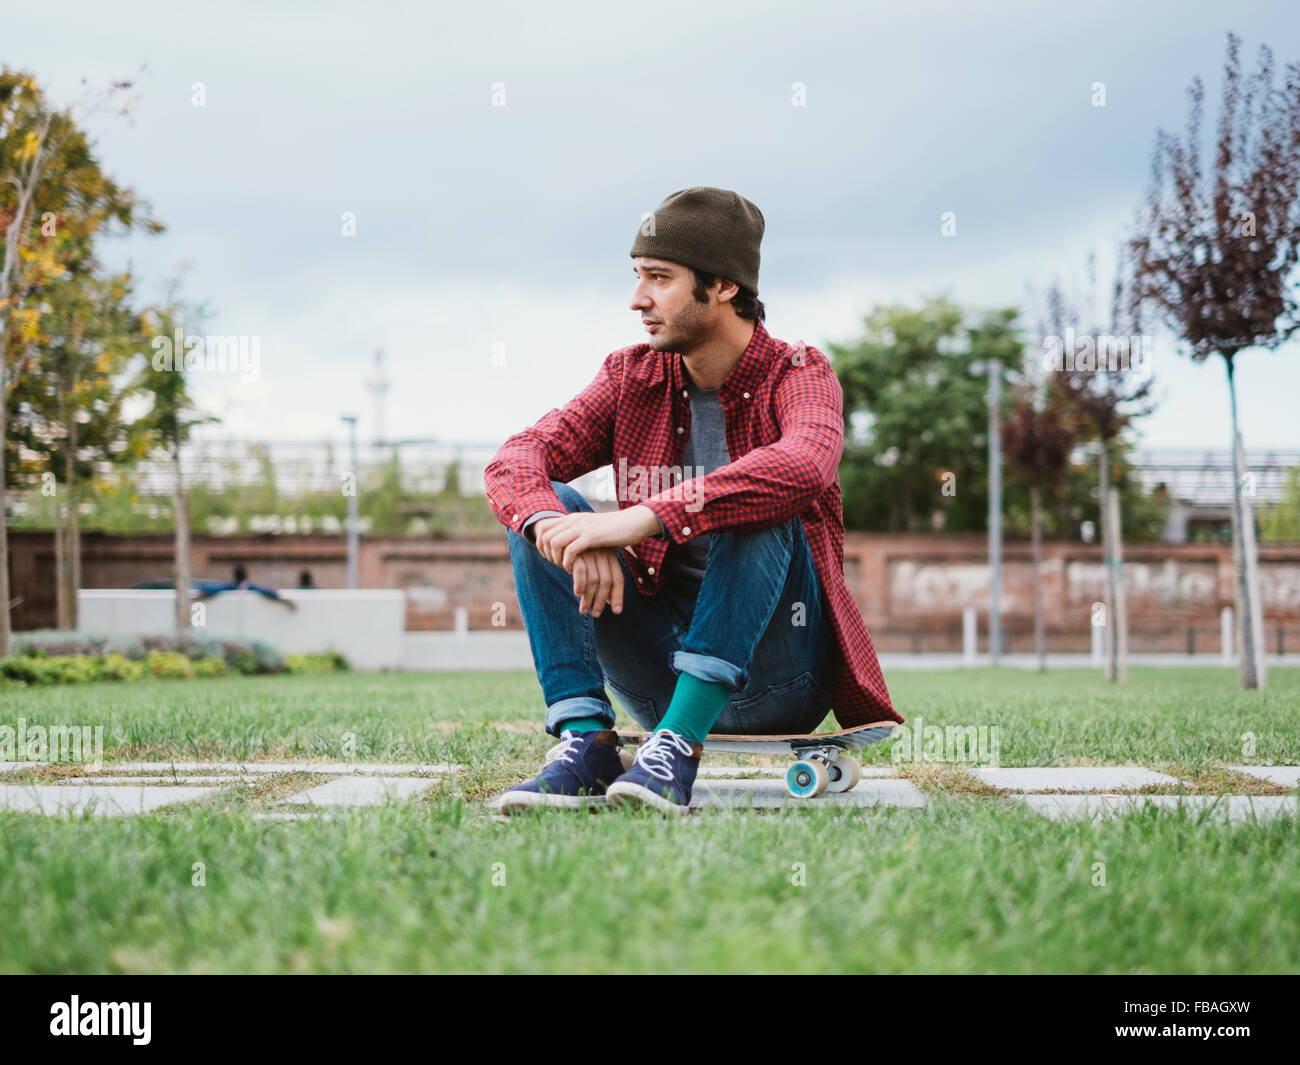 A guy sitting on his skateboard Stock Photo